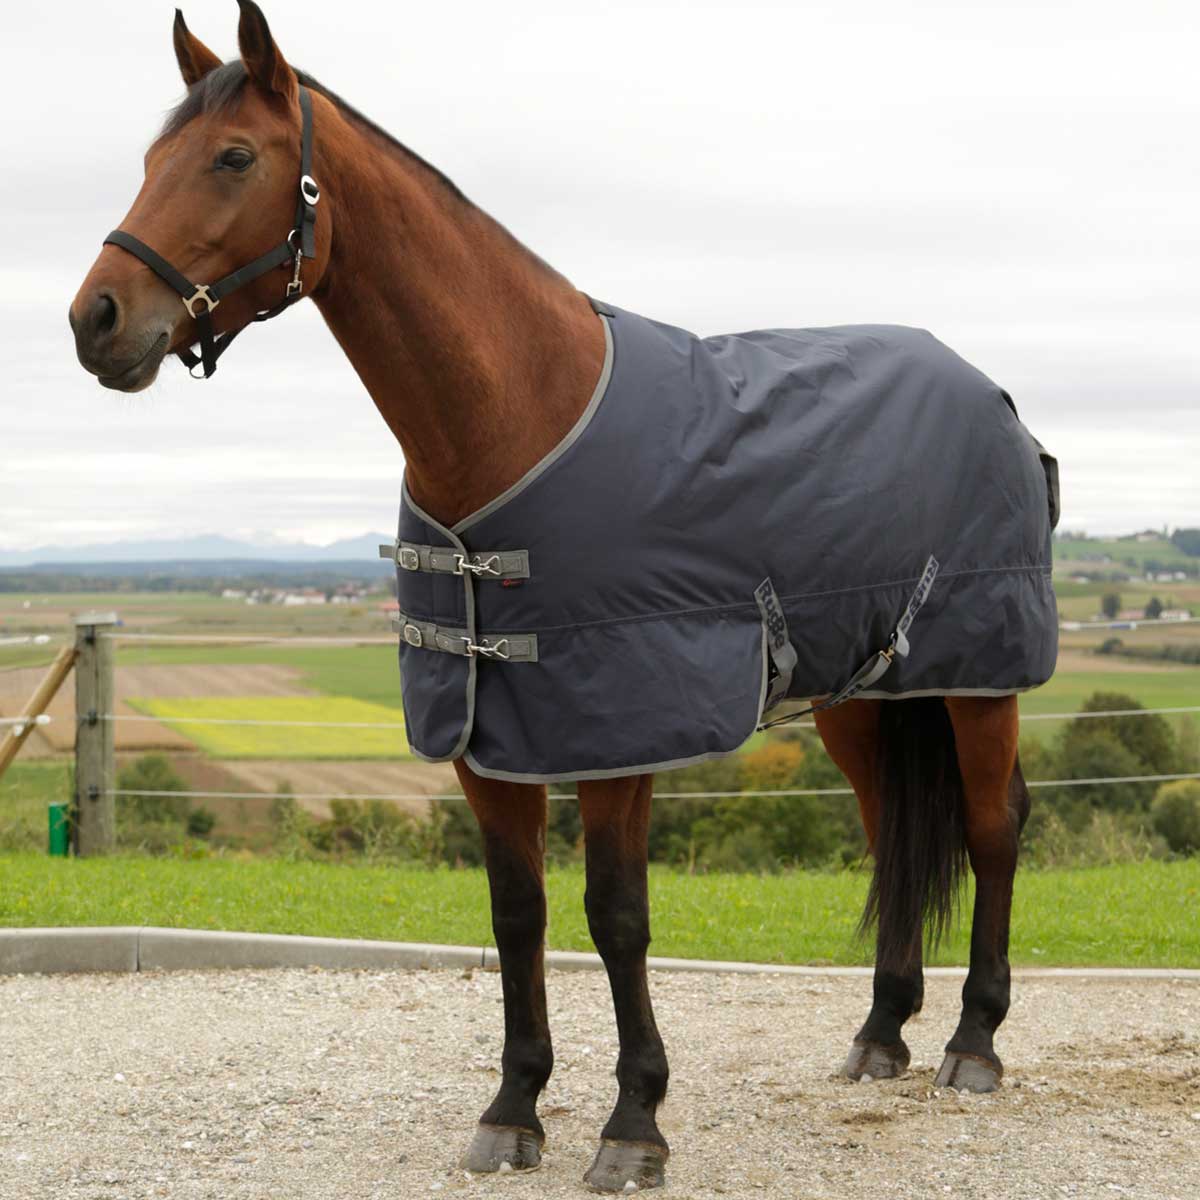 Covalliero Tapis de cheval RugBe IceProtect navy 600d, 300g